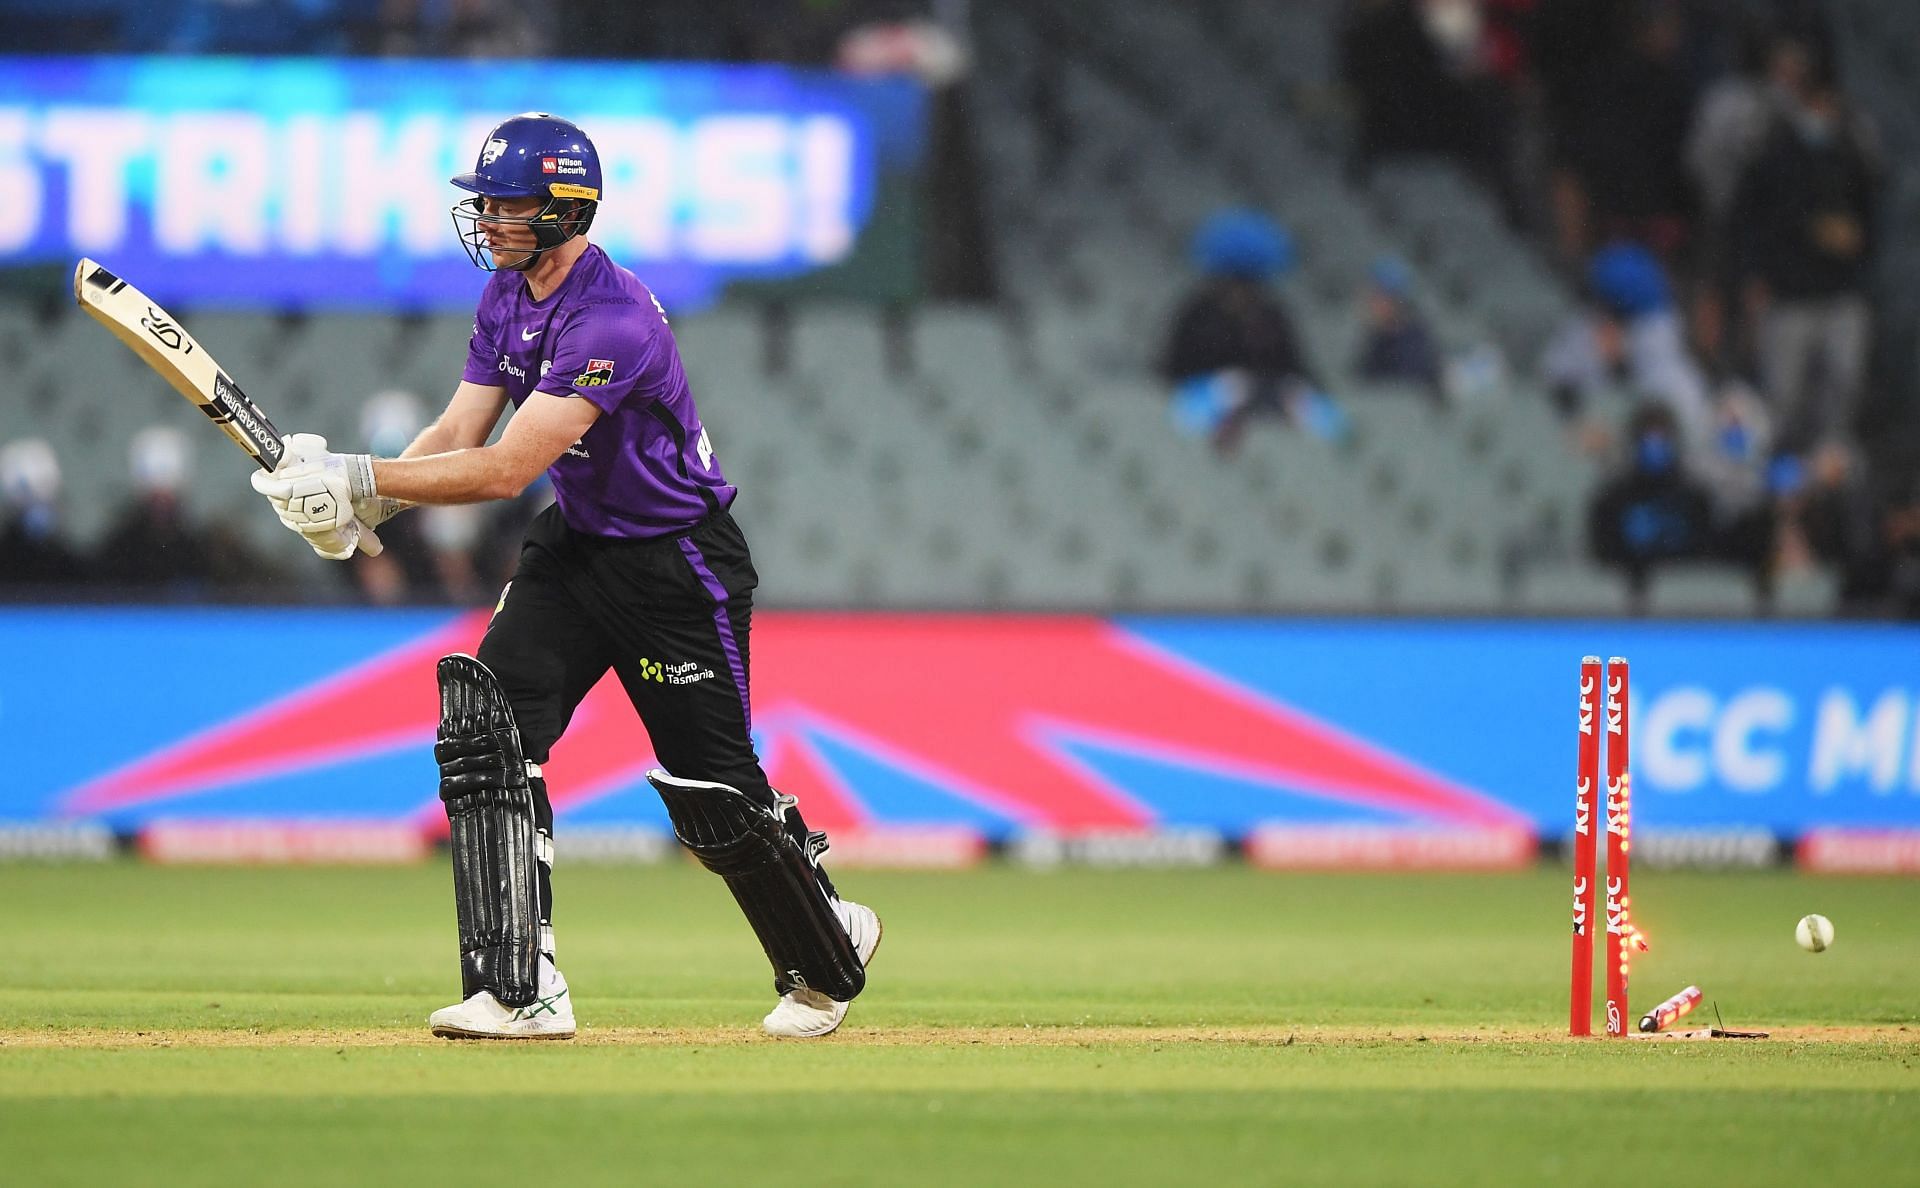 The Hurricanes are coming off a torrid outing against the Strikers in the BBL.